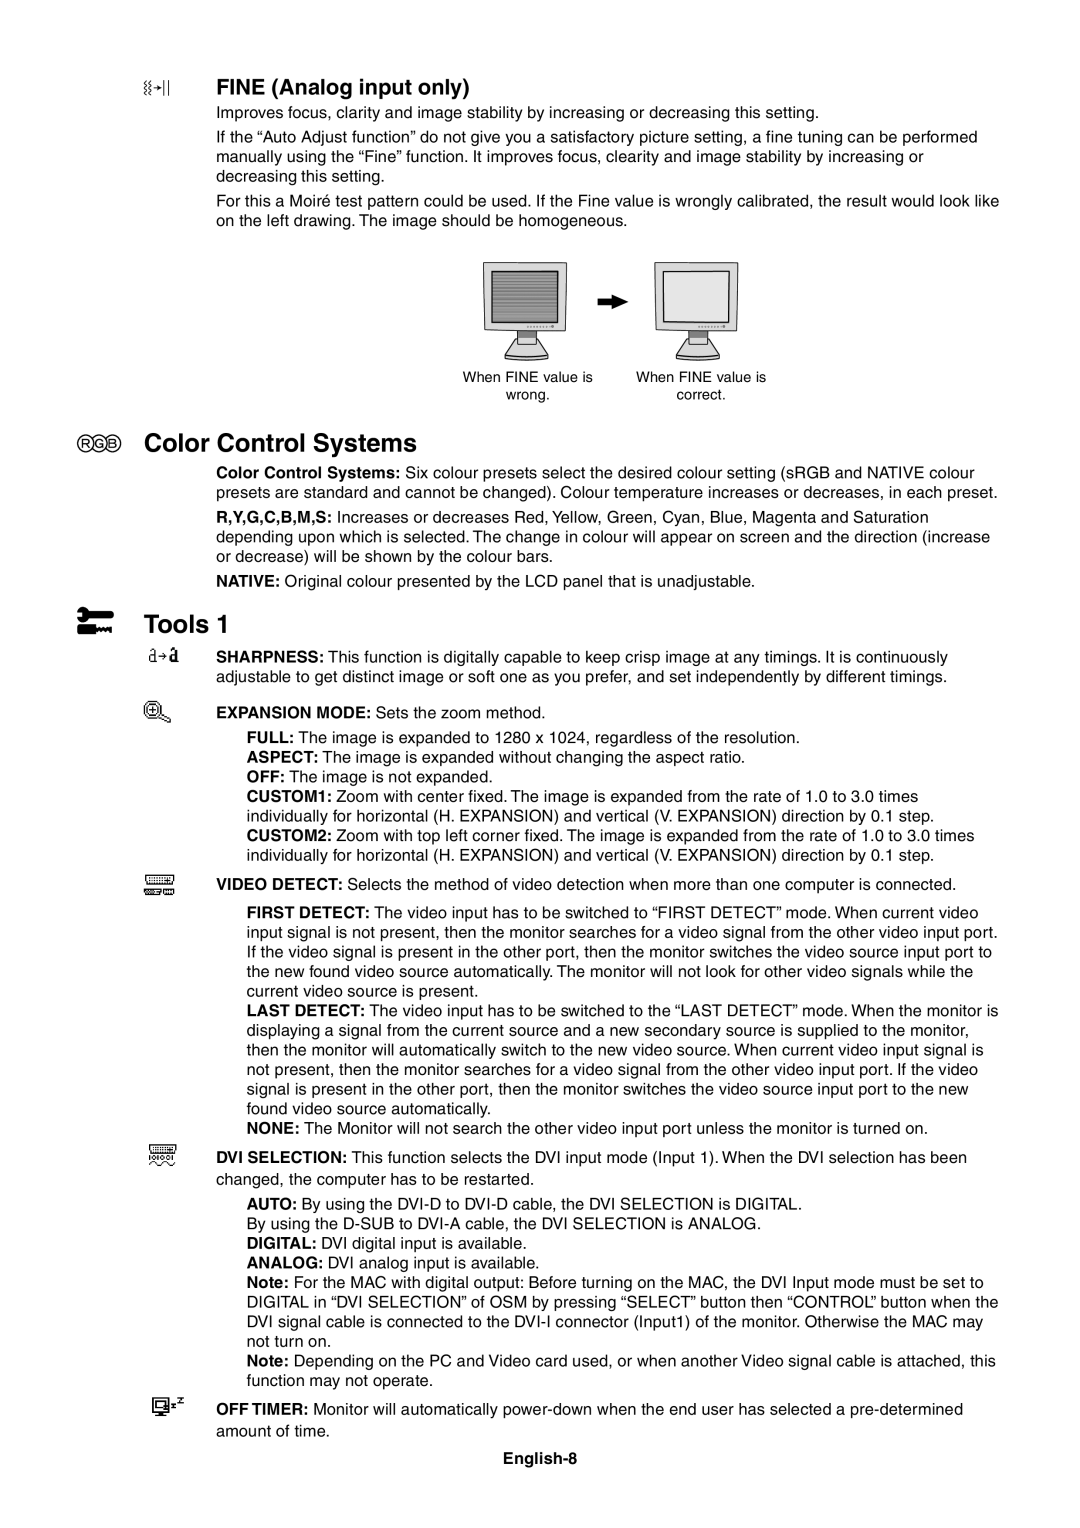 NEC LCD1980SX user manual Color Control Systems, Tools, FINE Analog input only, English-8 